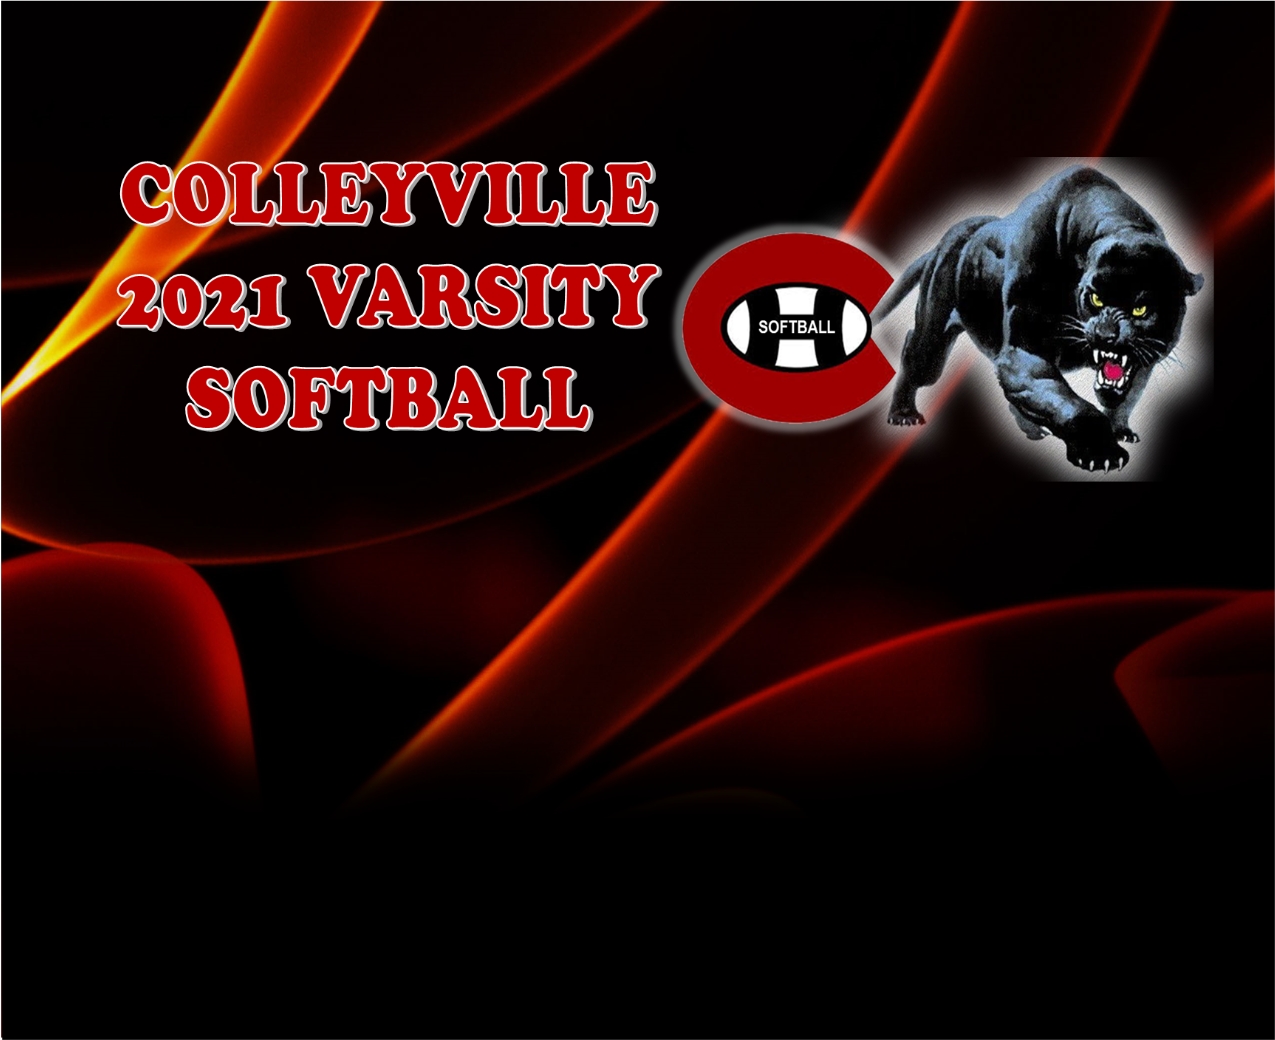 GCISD Softball: Colleyville Lady Panthers Triumph Over Aledo Ladycats to Take Game 2 of Regional Quarterfinals Series 8-4